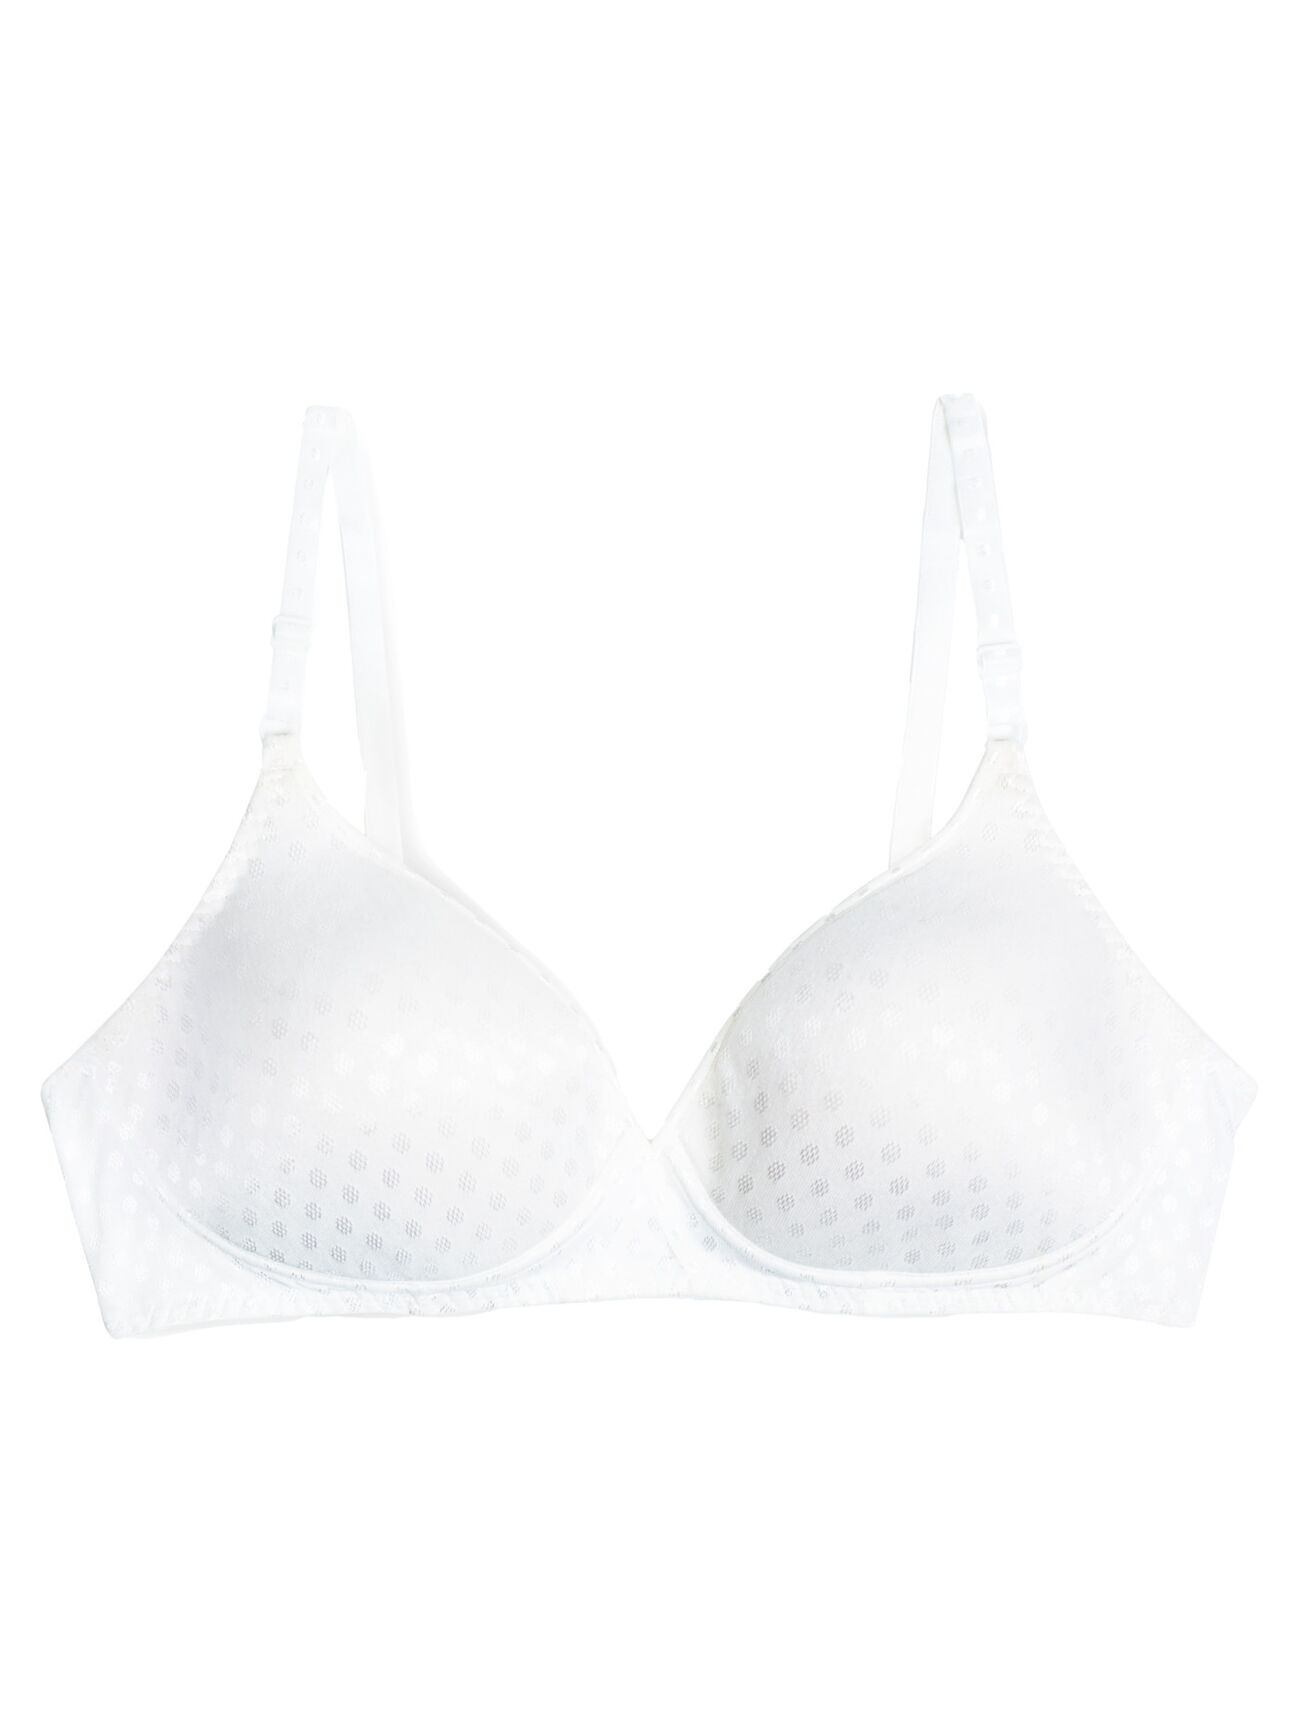 petroleum Lake Taupo Ambiguous padded bras stainless very Compete